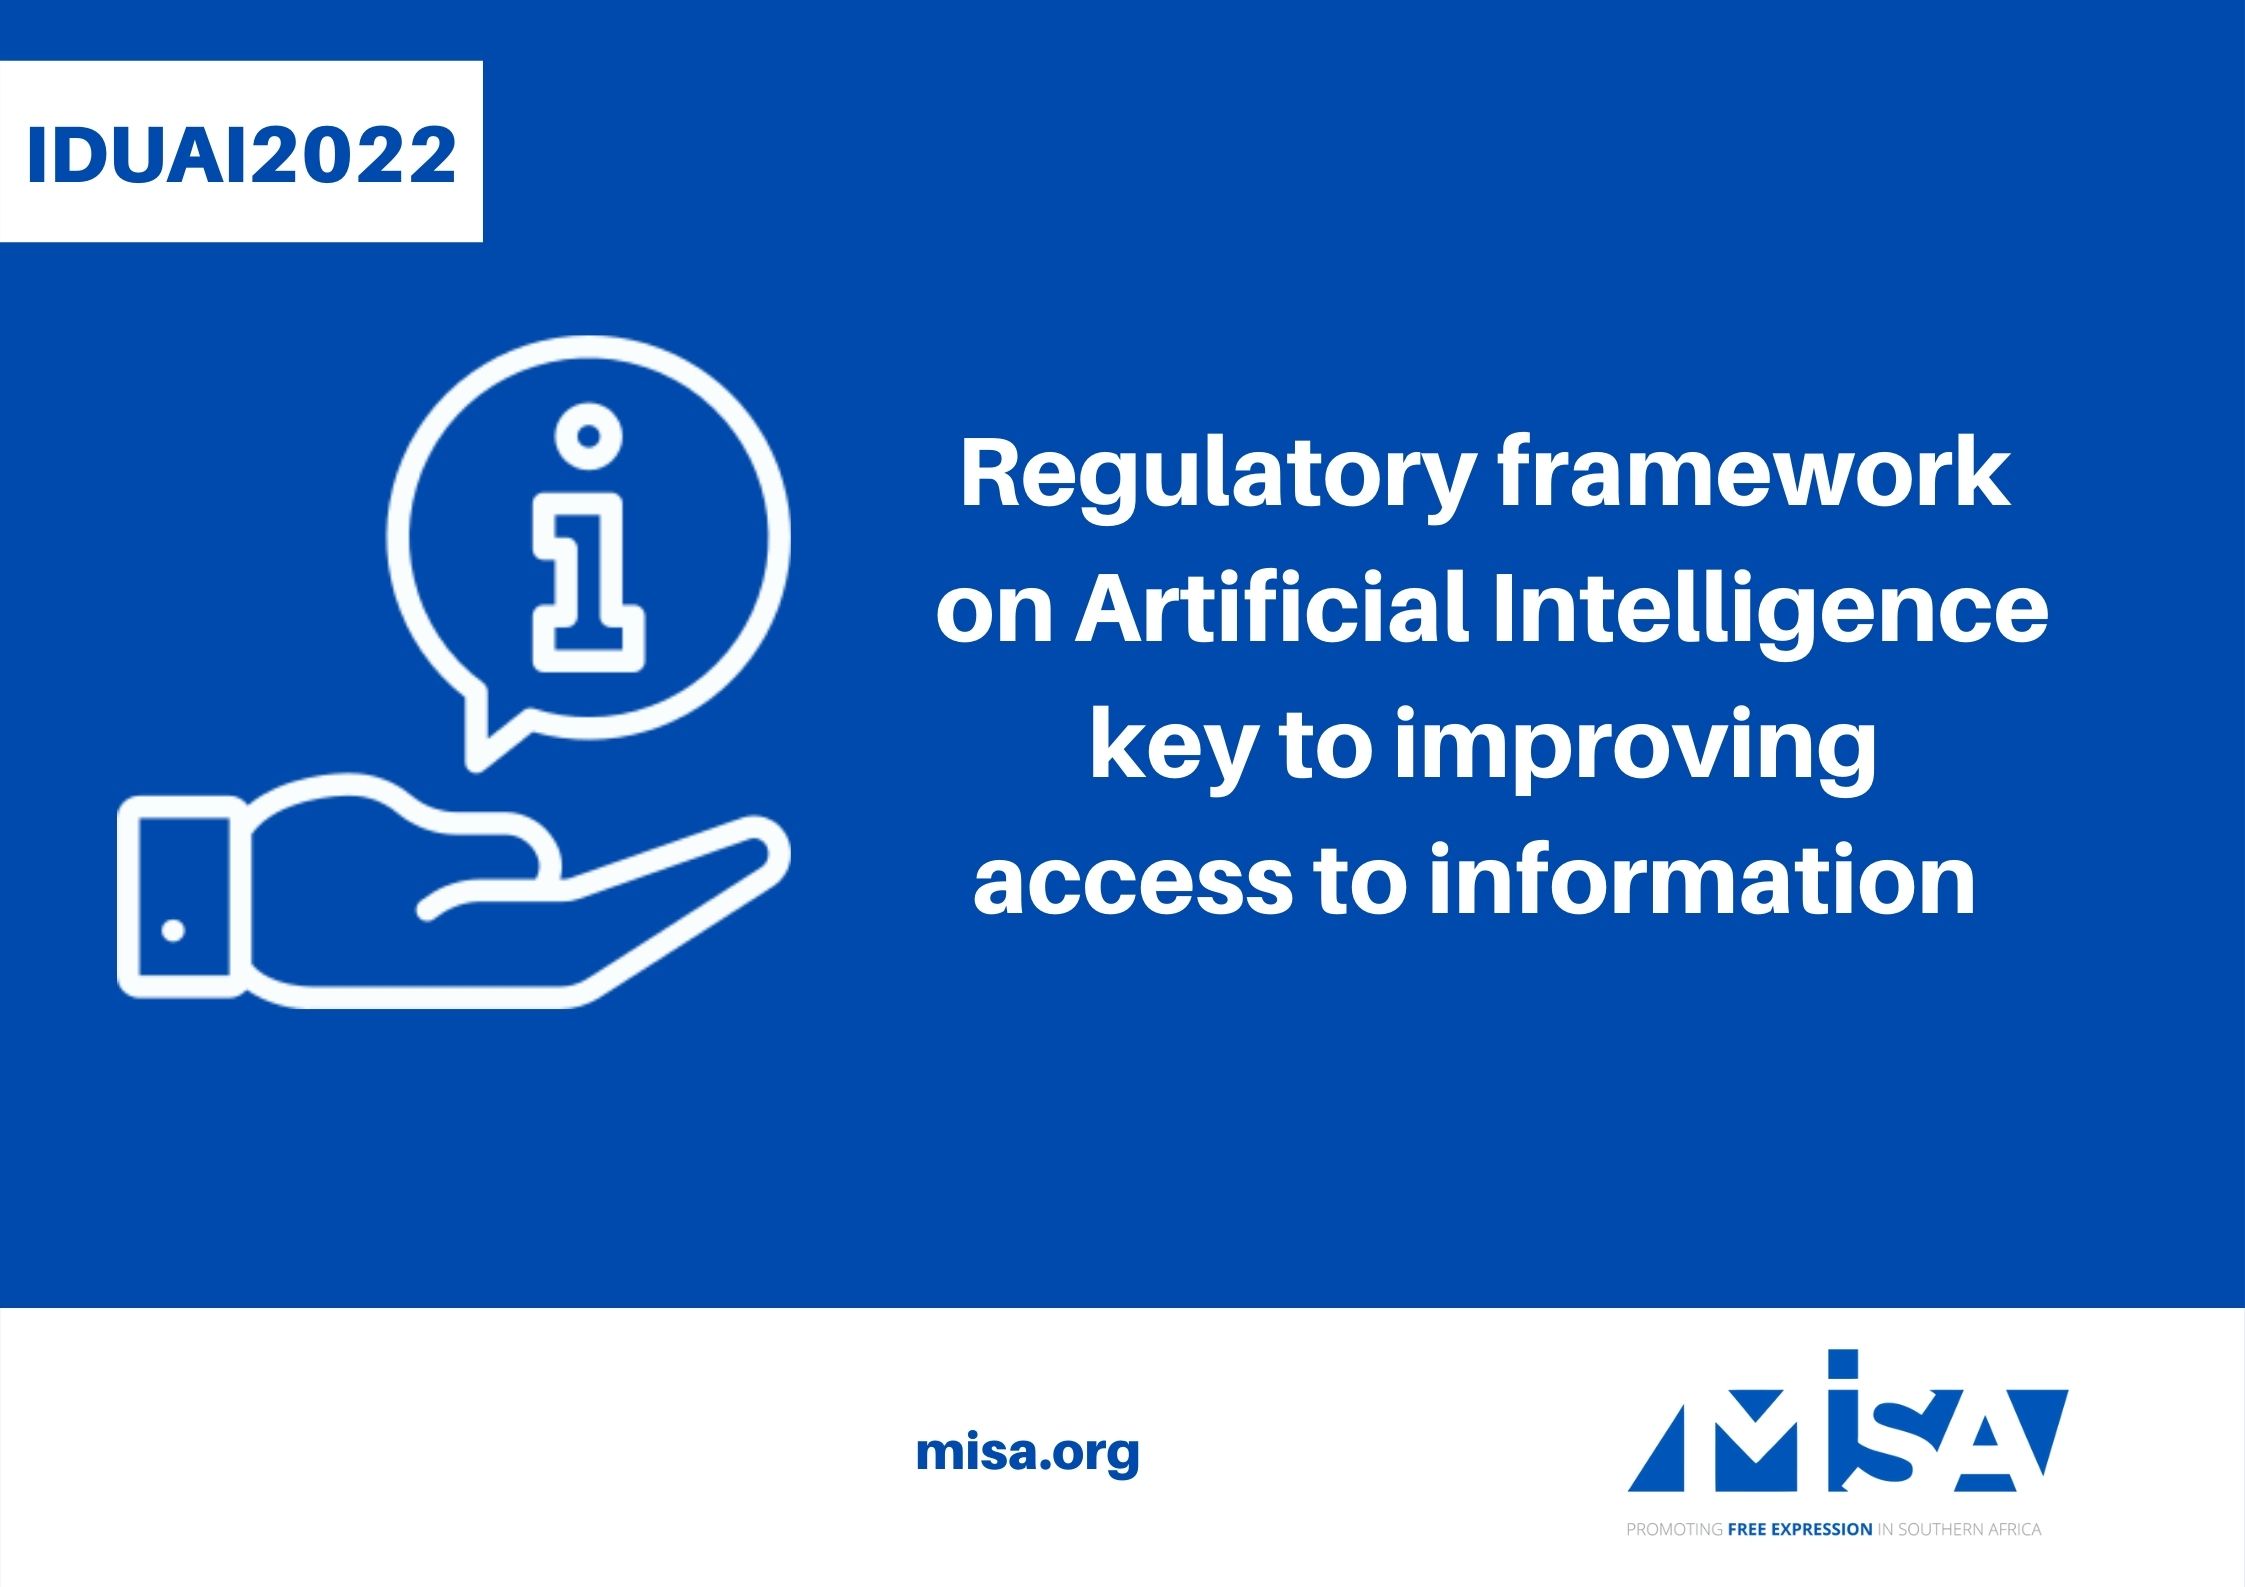 Regulatory framework on Artificial Intelligence key to improving access to information